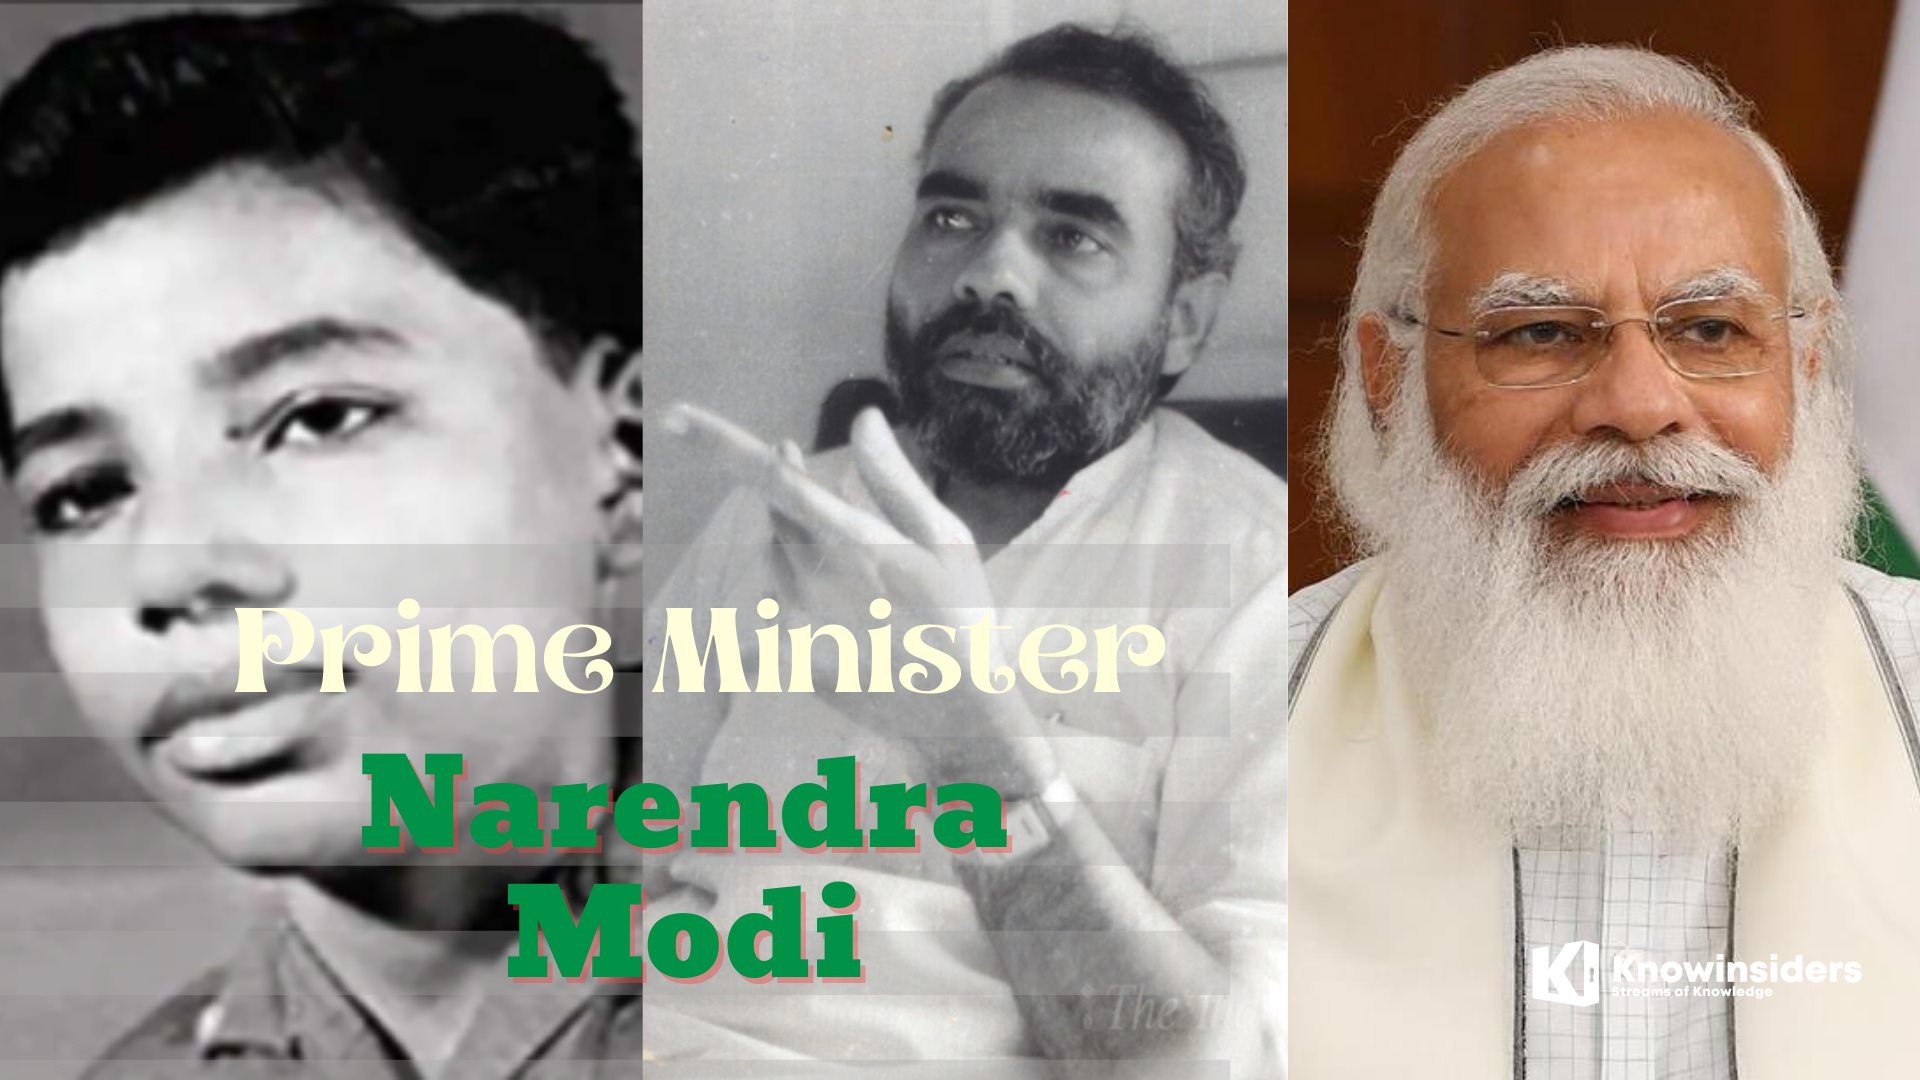 Prime Minister Narendra Modi: Horoscope, Astrological Prediction and Zodiac Sign Personality. Photo: knowinsiders.